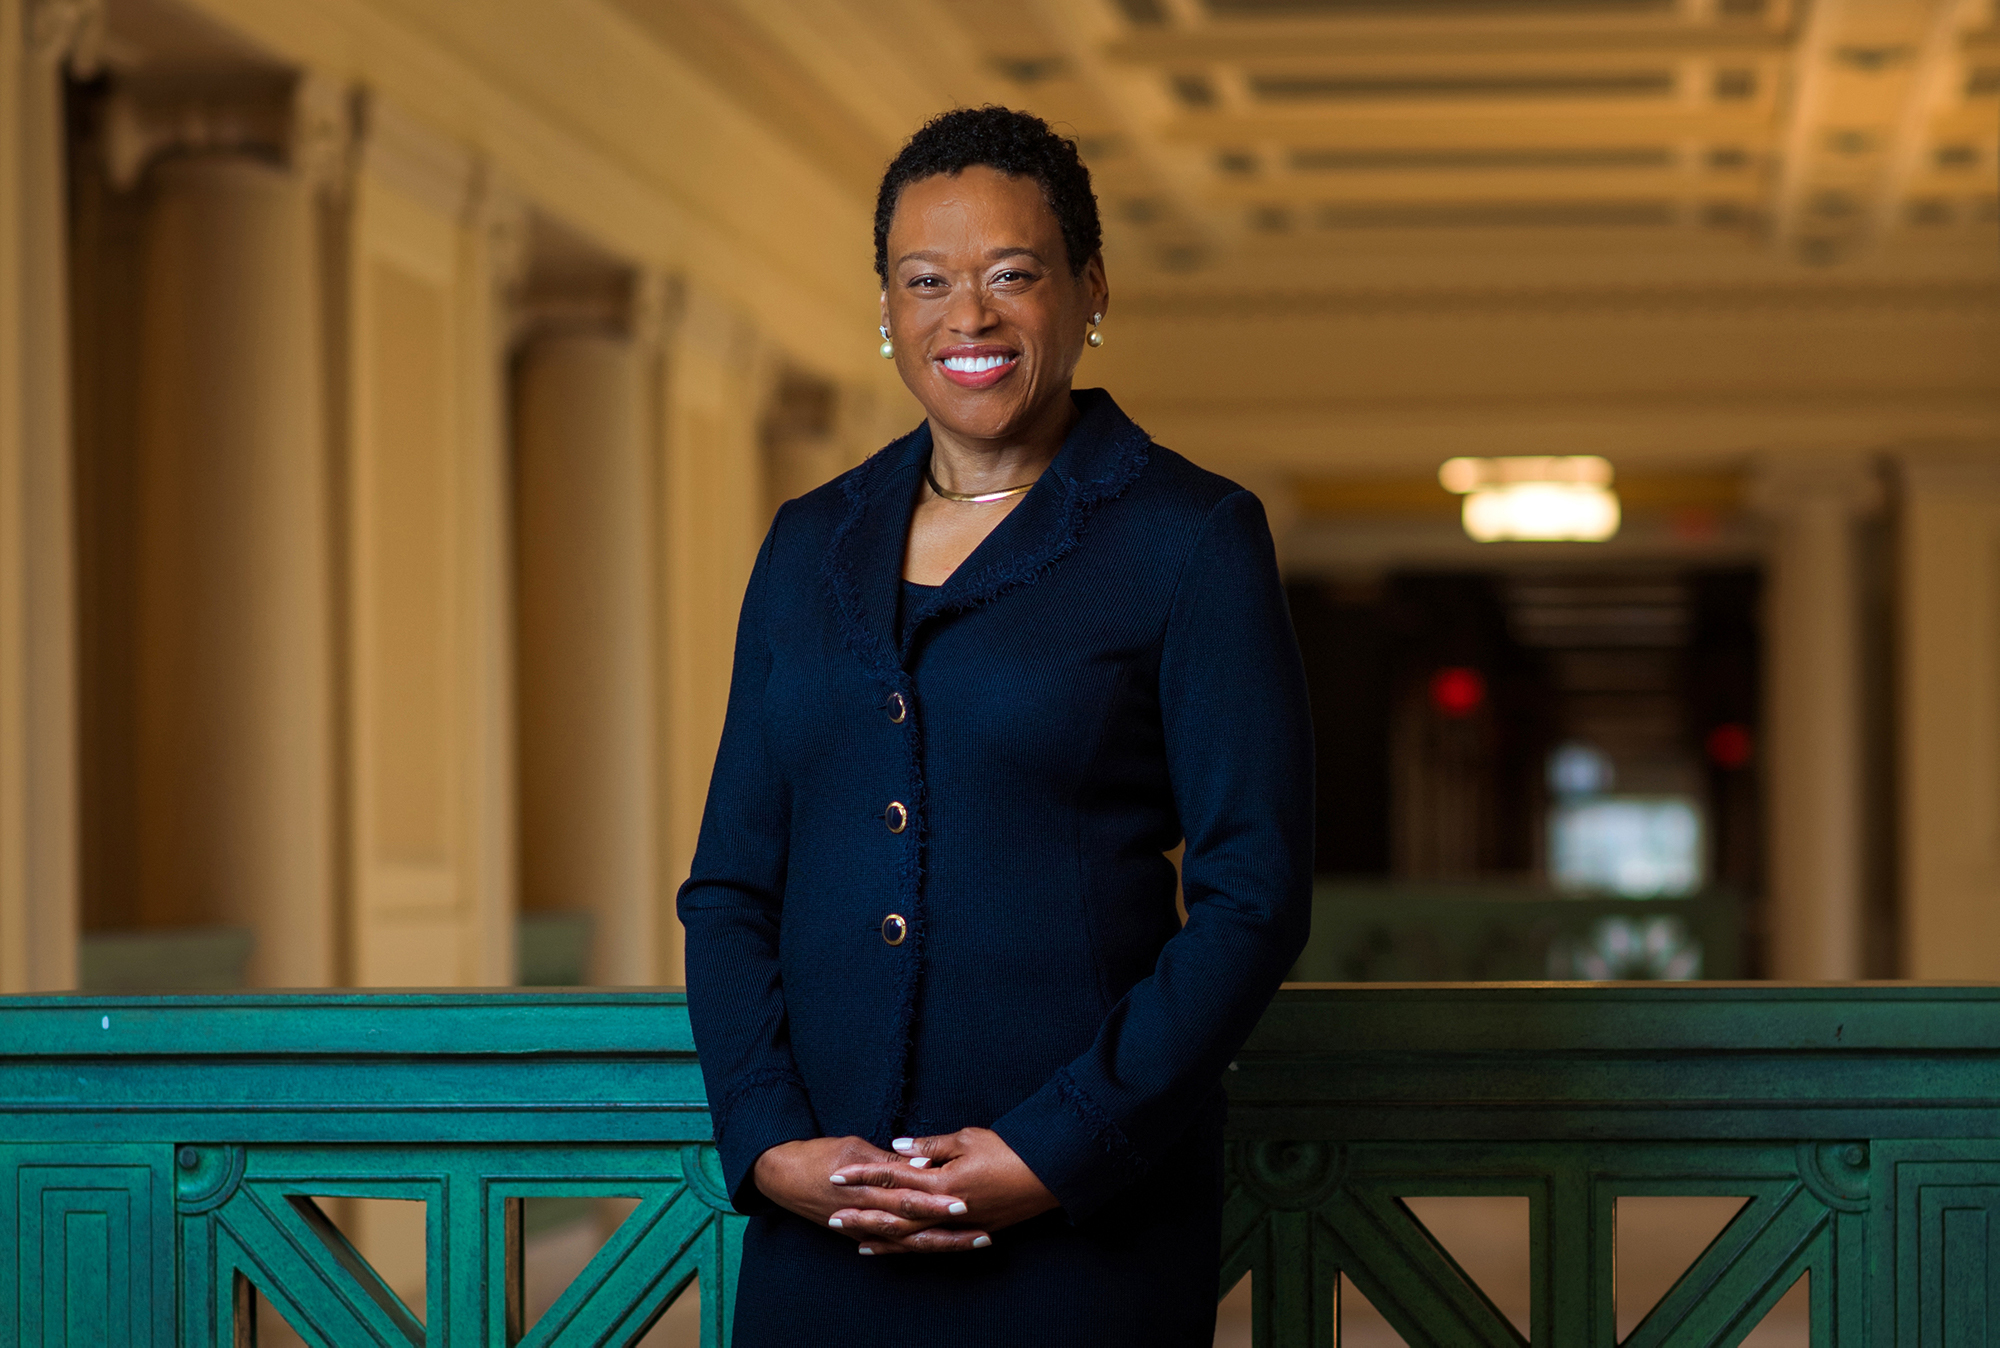 “Our message is that science is a human endeavor, and that requires taking in all human knowledge,” says MIT Chancellor Melissa Nobles, who is one of four guest editors of special issues of Nature.